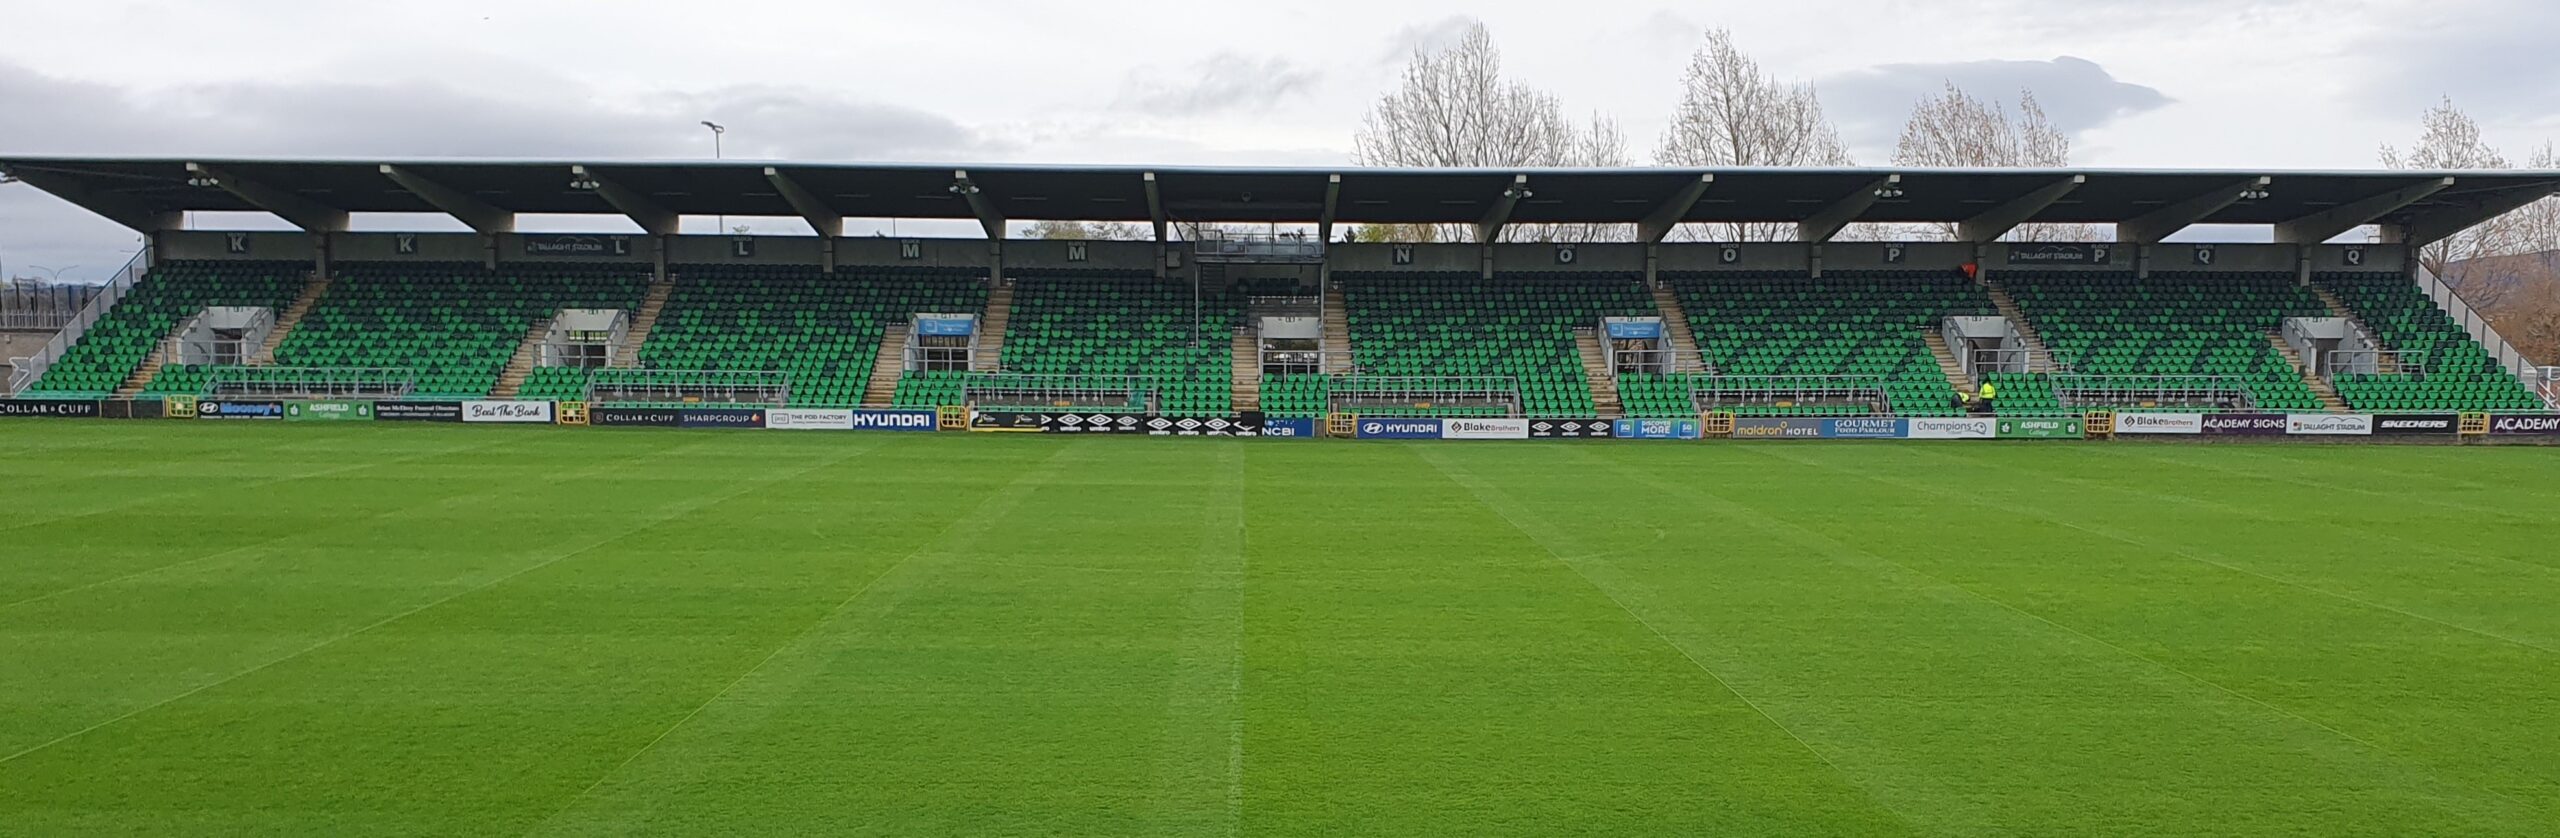 Tallaght Stadium renovates its stands with Avatar seats